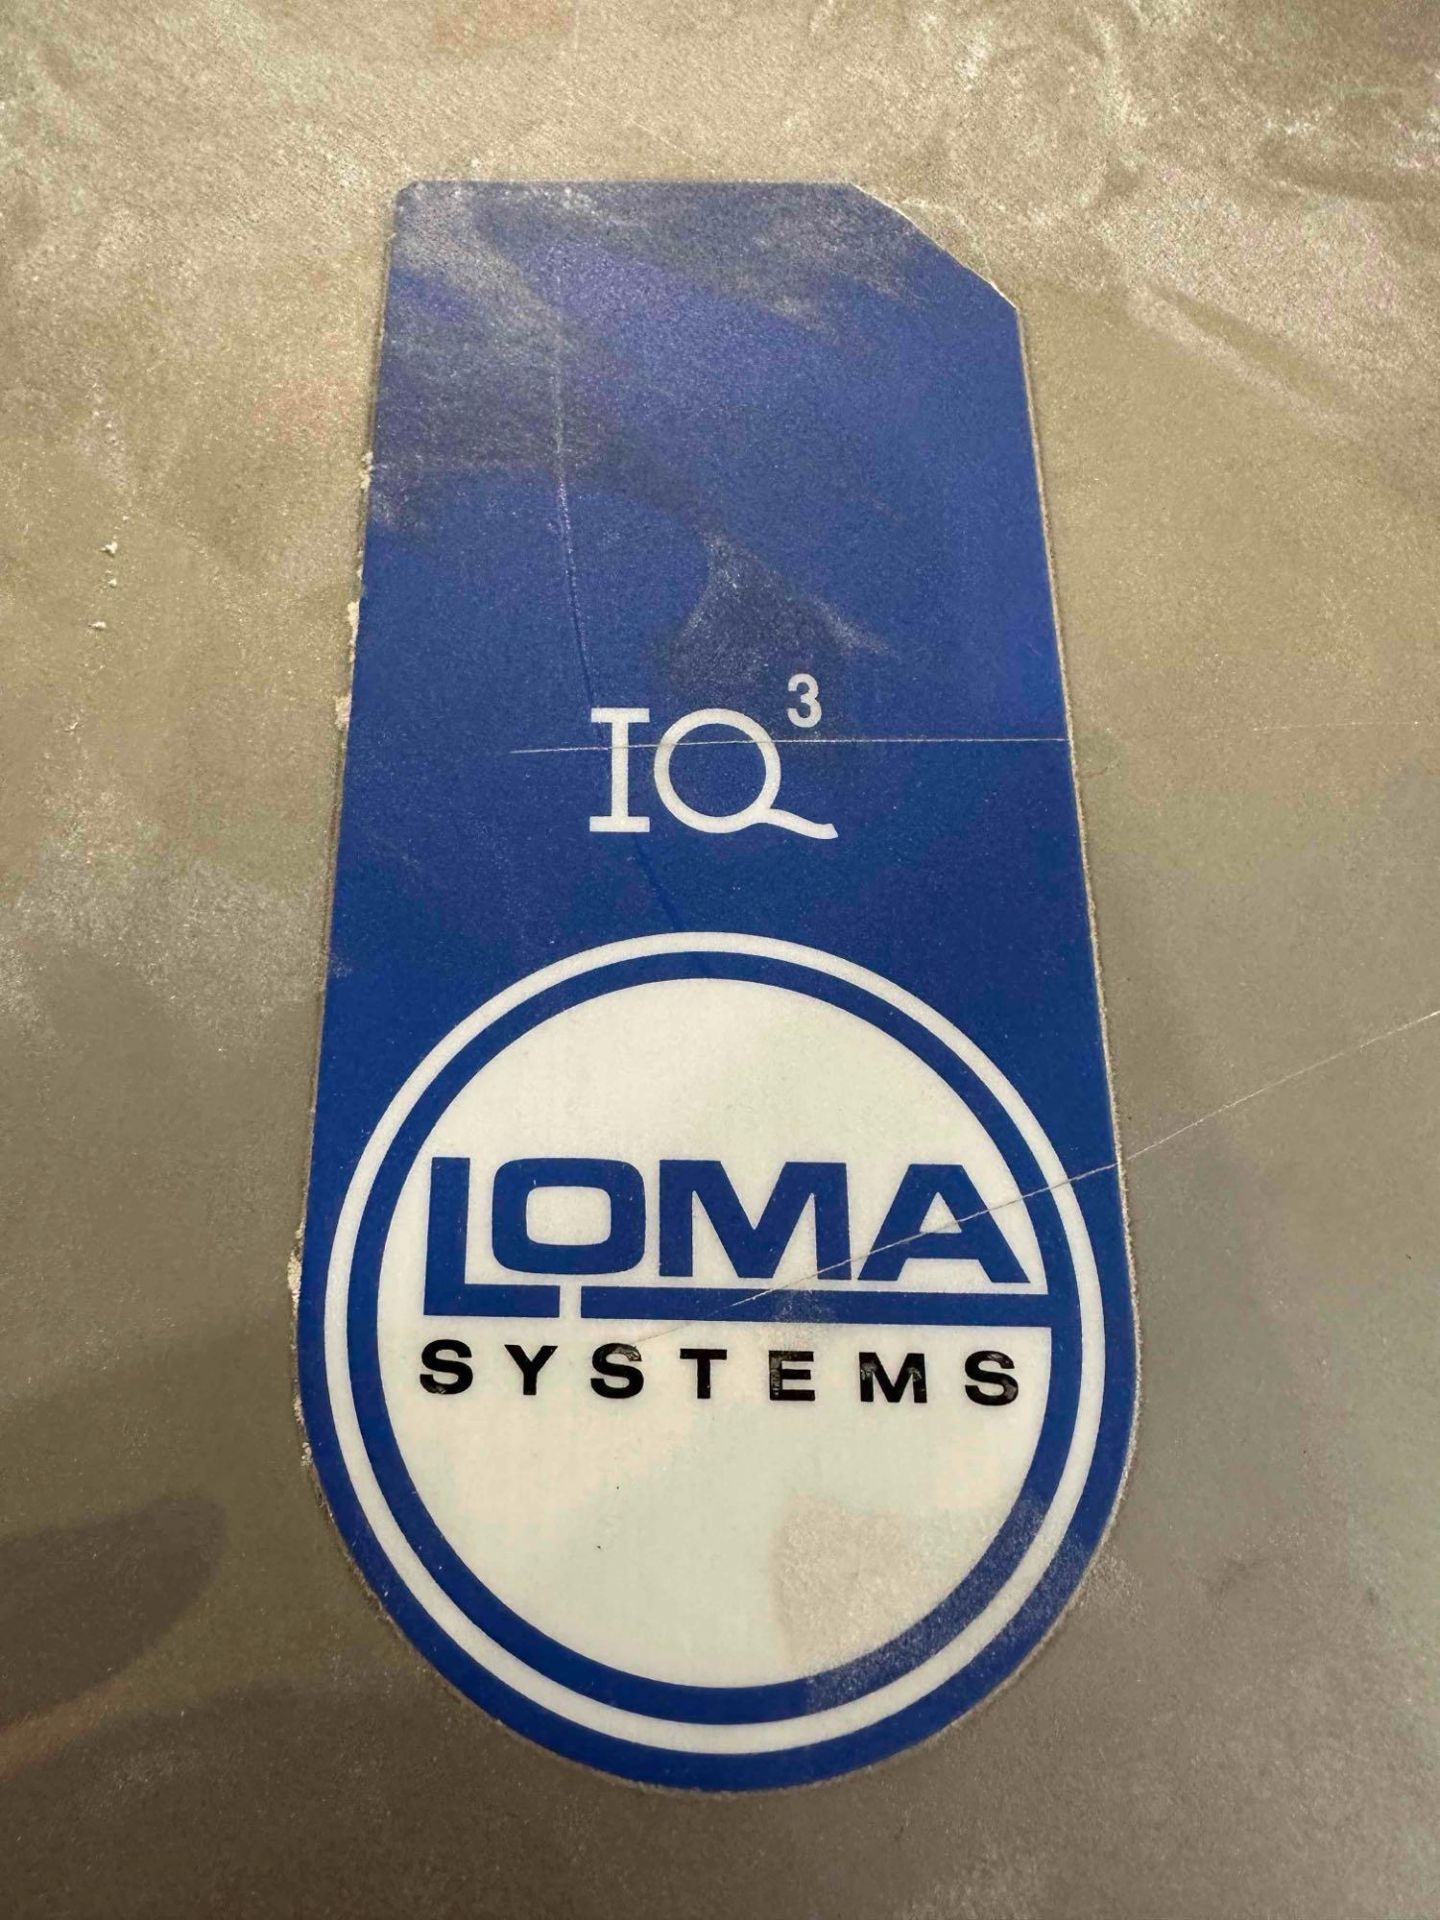 Loma IQ3 8" T by 6" W Stainless Steel Metal Detector - Image 2 of 7